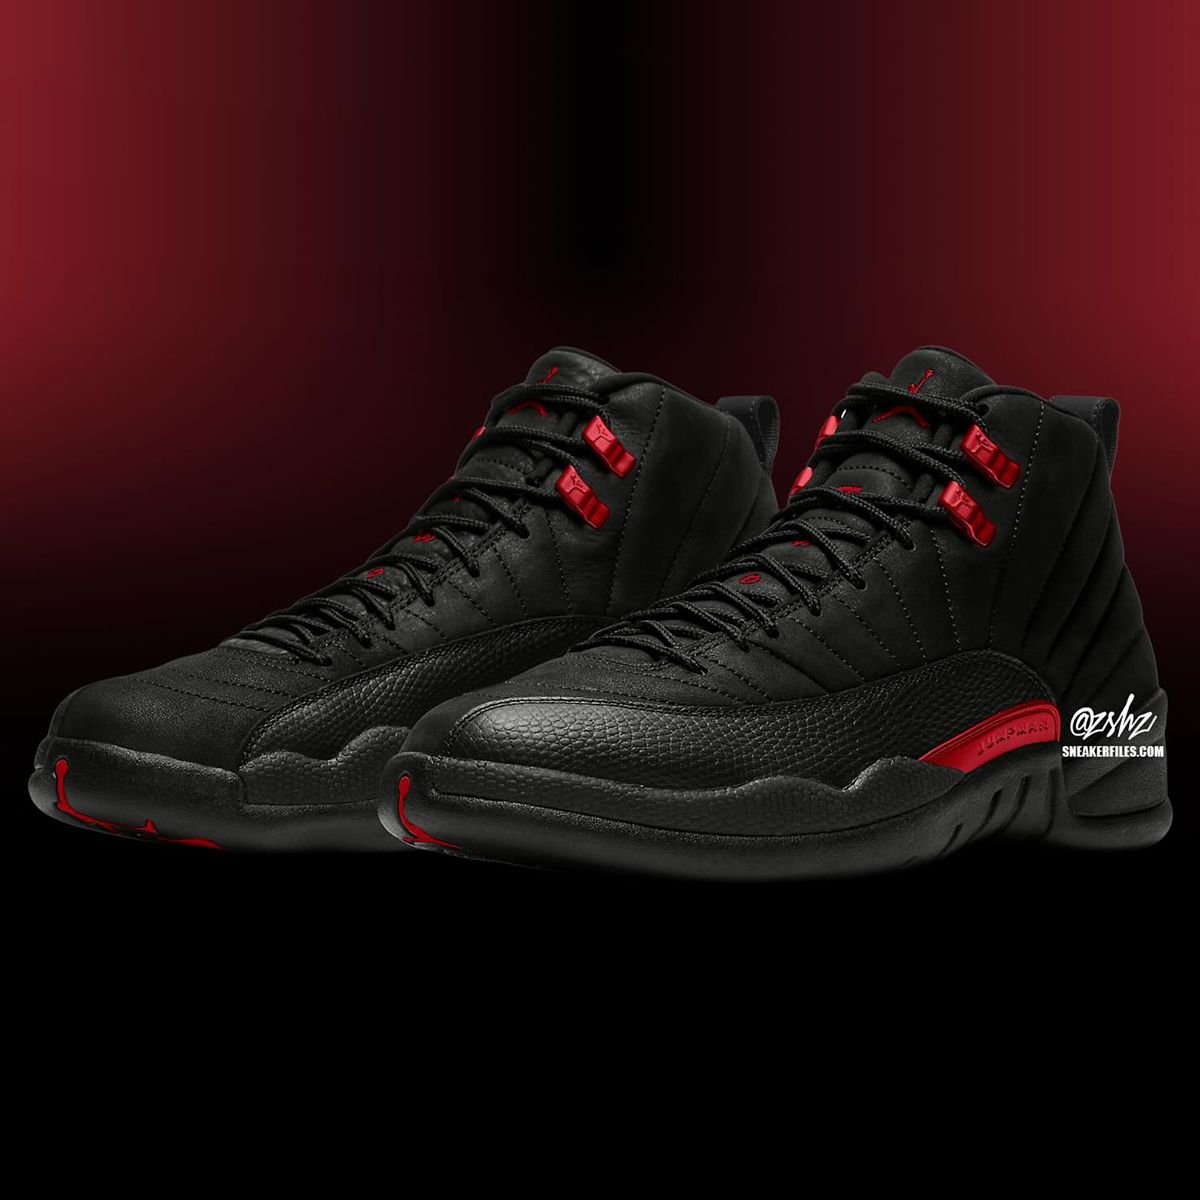 Air Jordan 12 'Bloodline' 🩸 Releasing January 2025 These are dropping in place of the Flu Game 12s